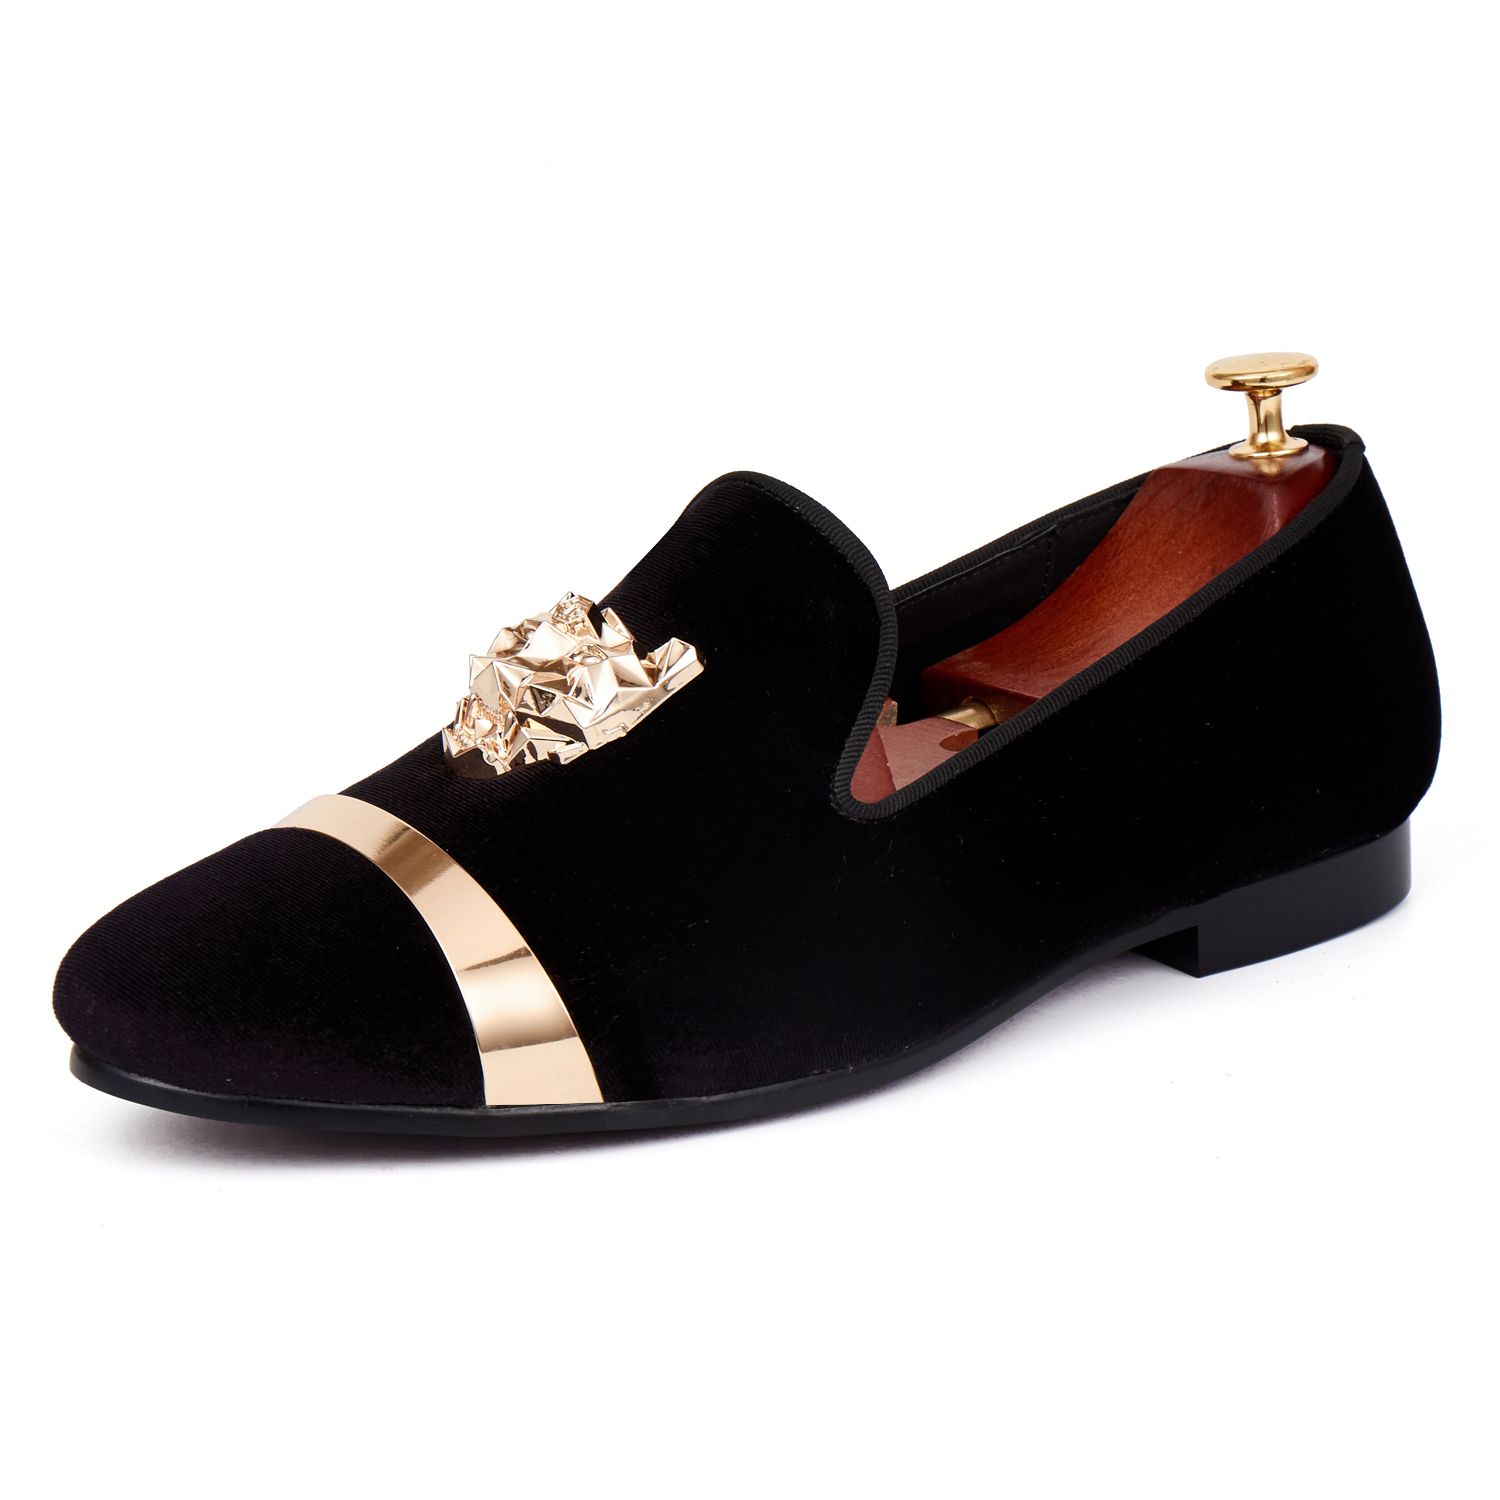 boys black and gold loafers